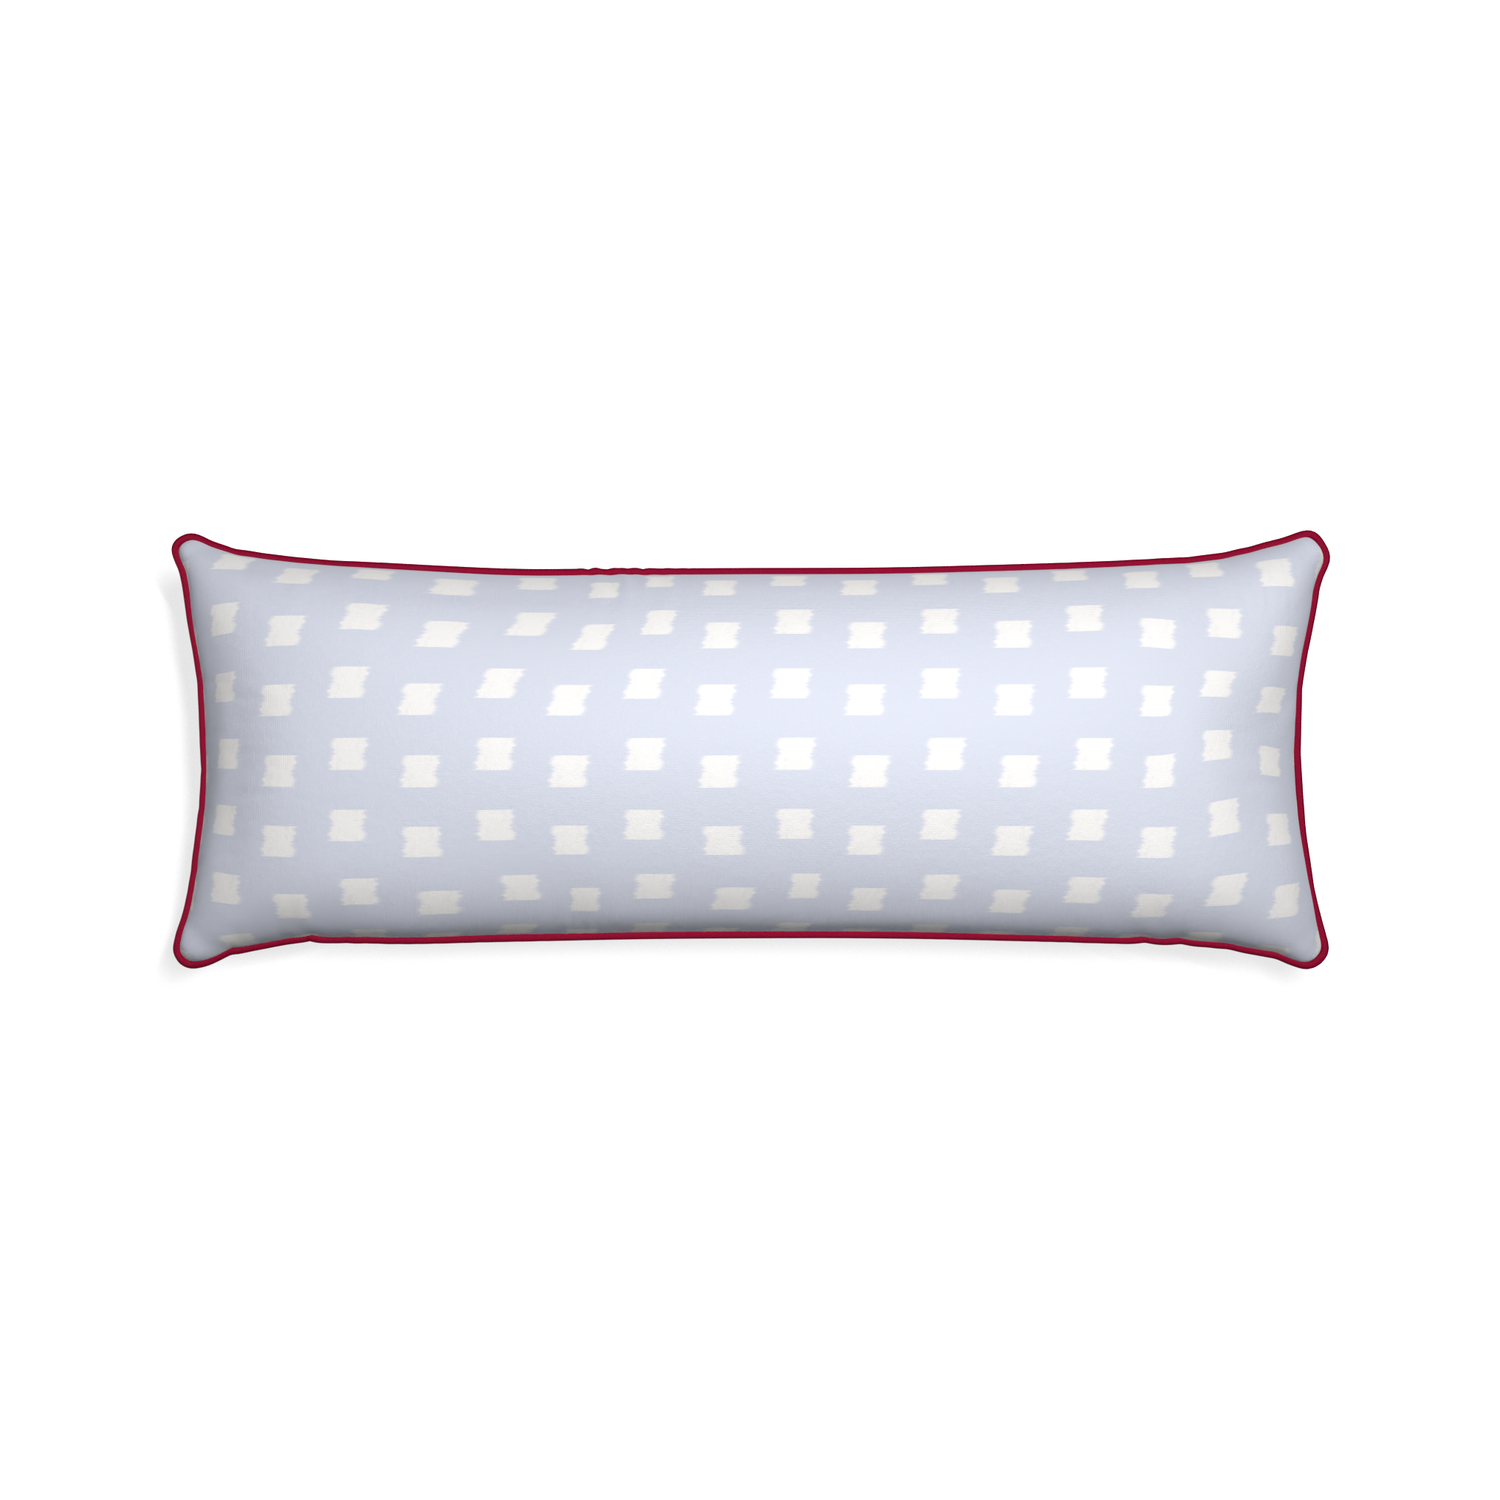 Xl-lumbar denton custom sky blue patternpillow with raspberry piping on white background